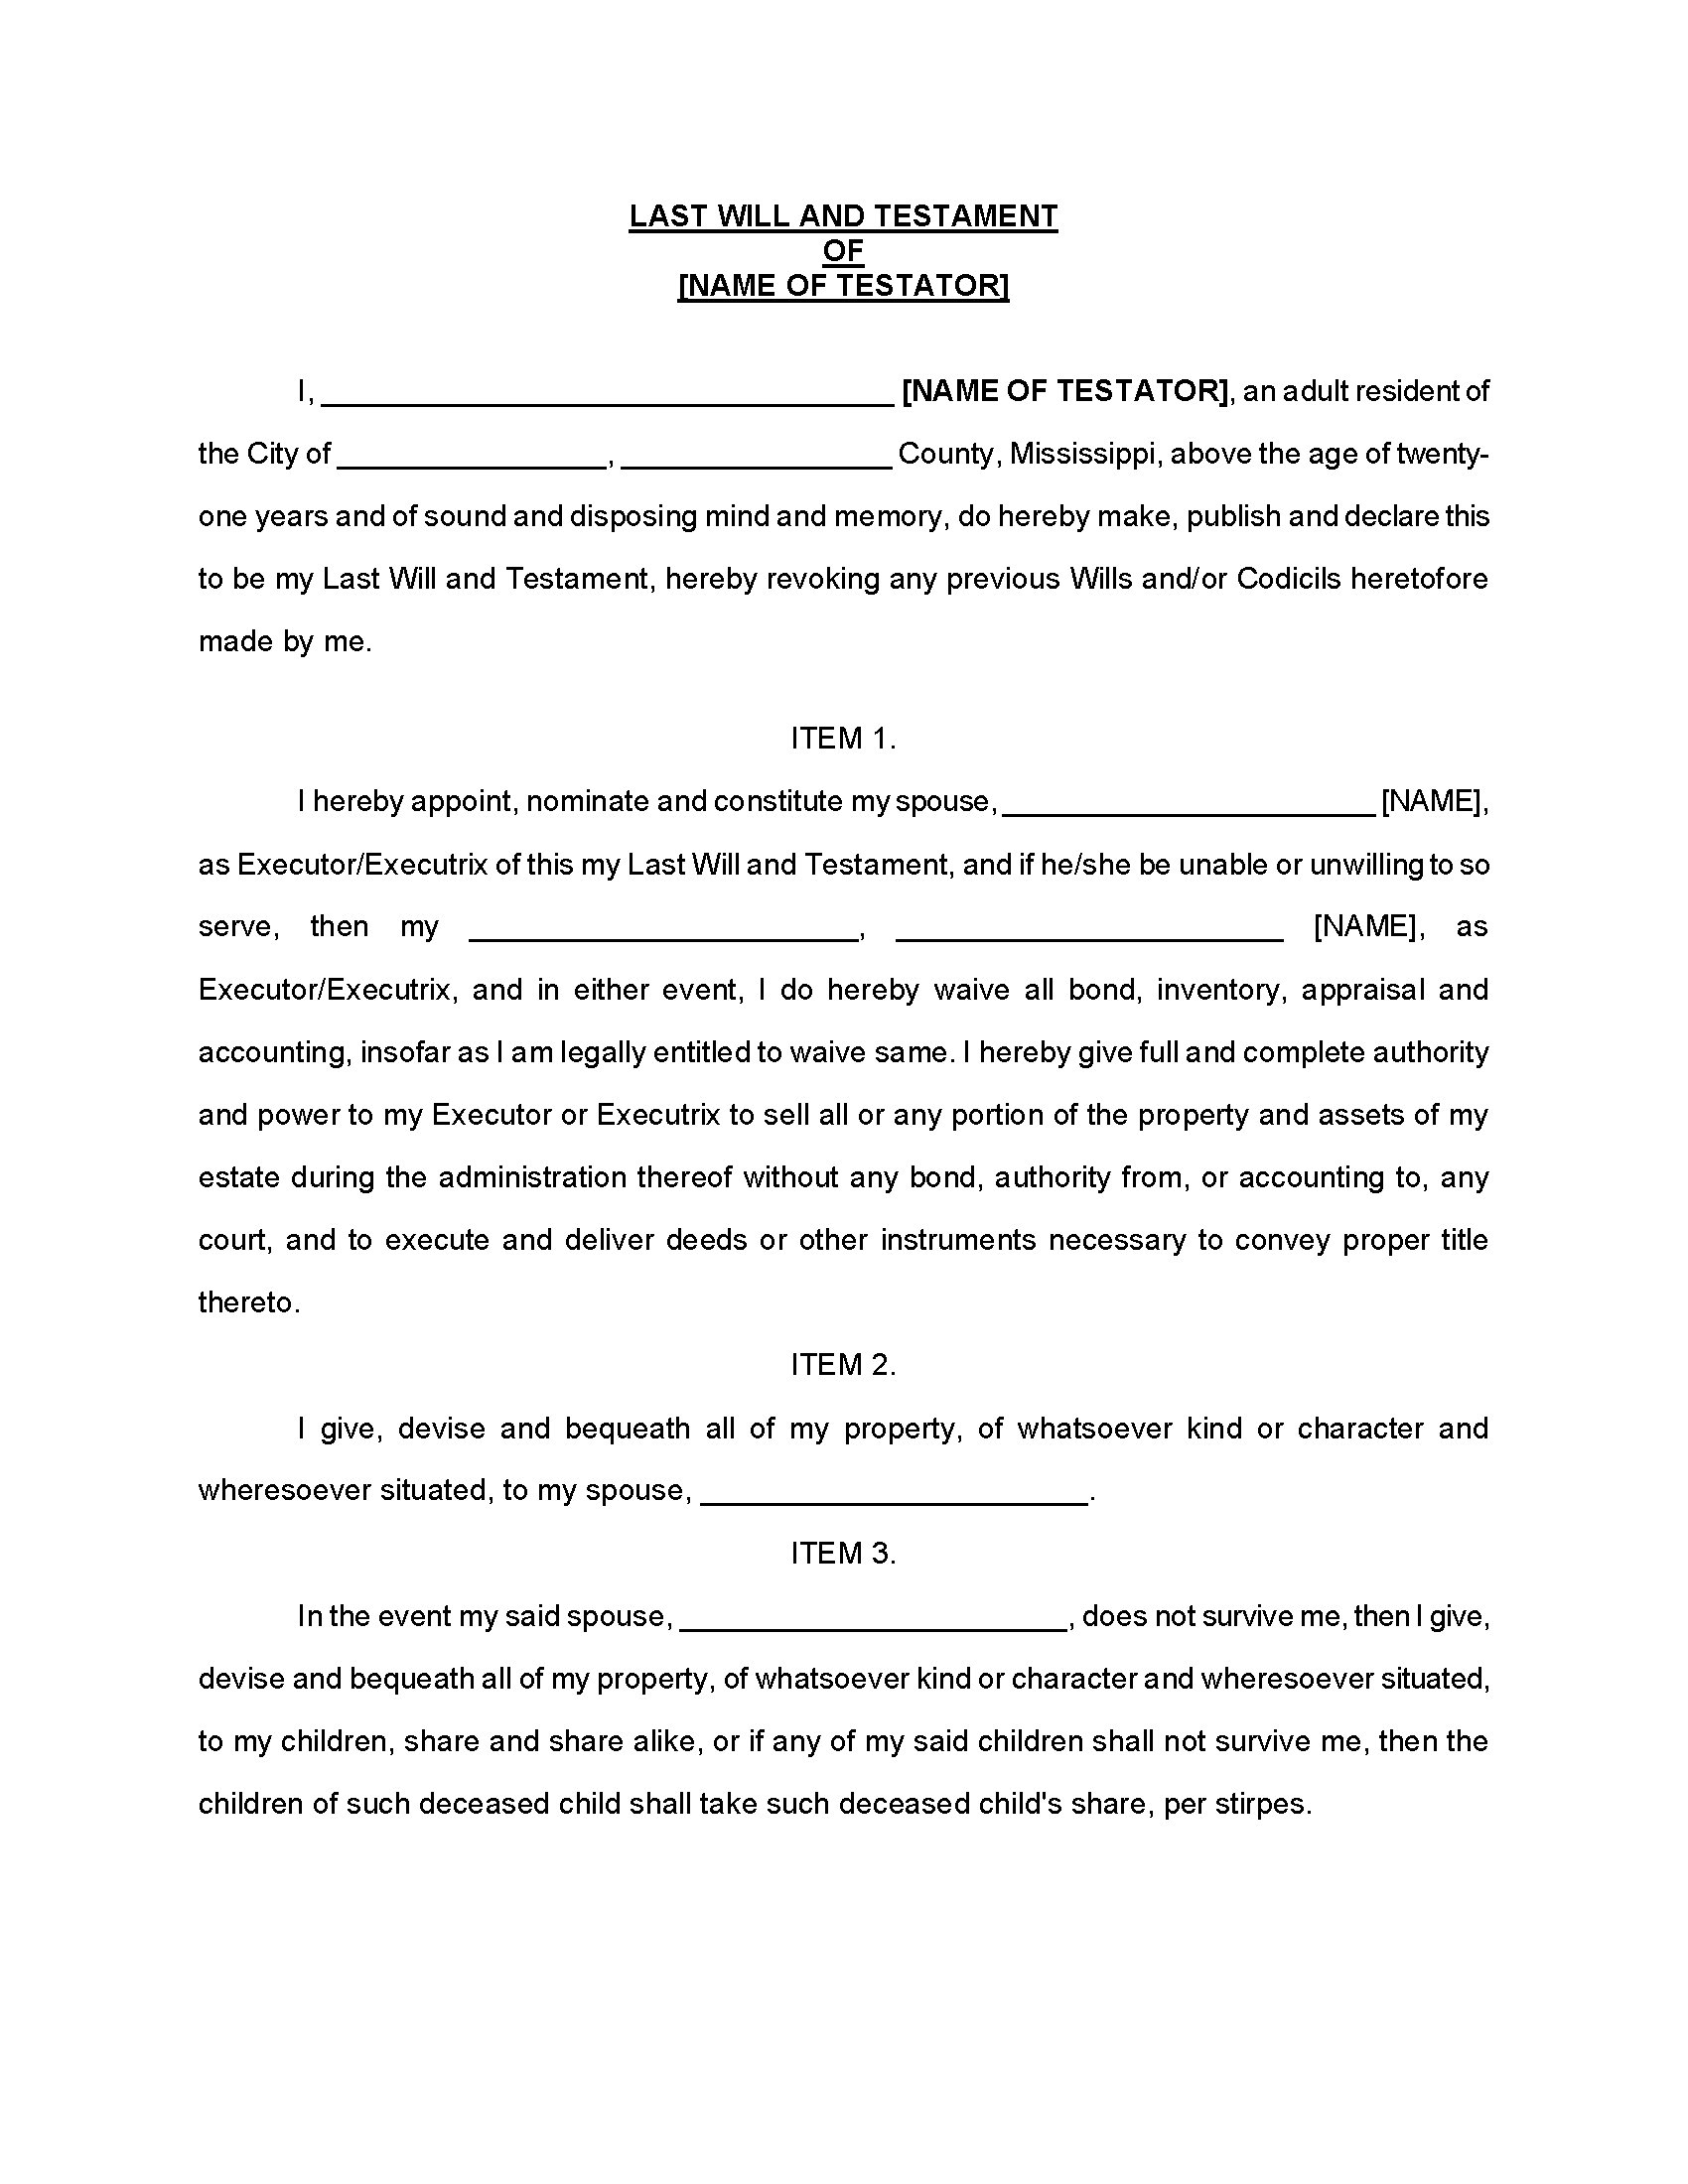 mississippi-simple-last-will-testament-legal-forms-and-business